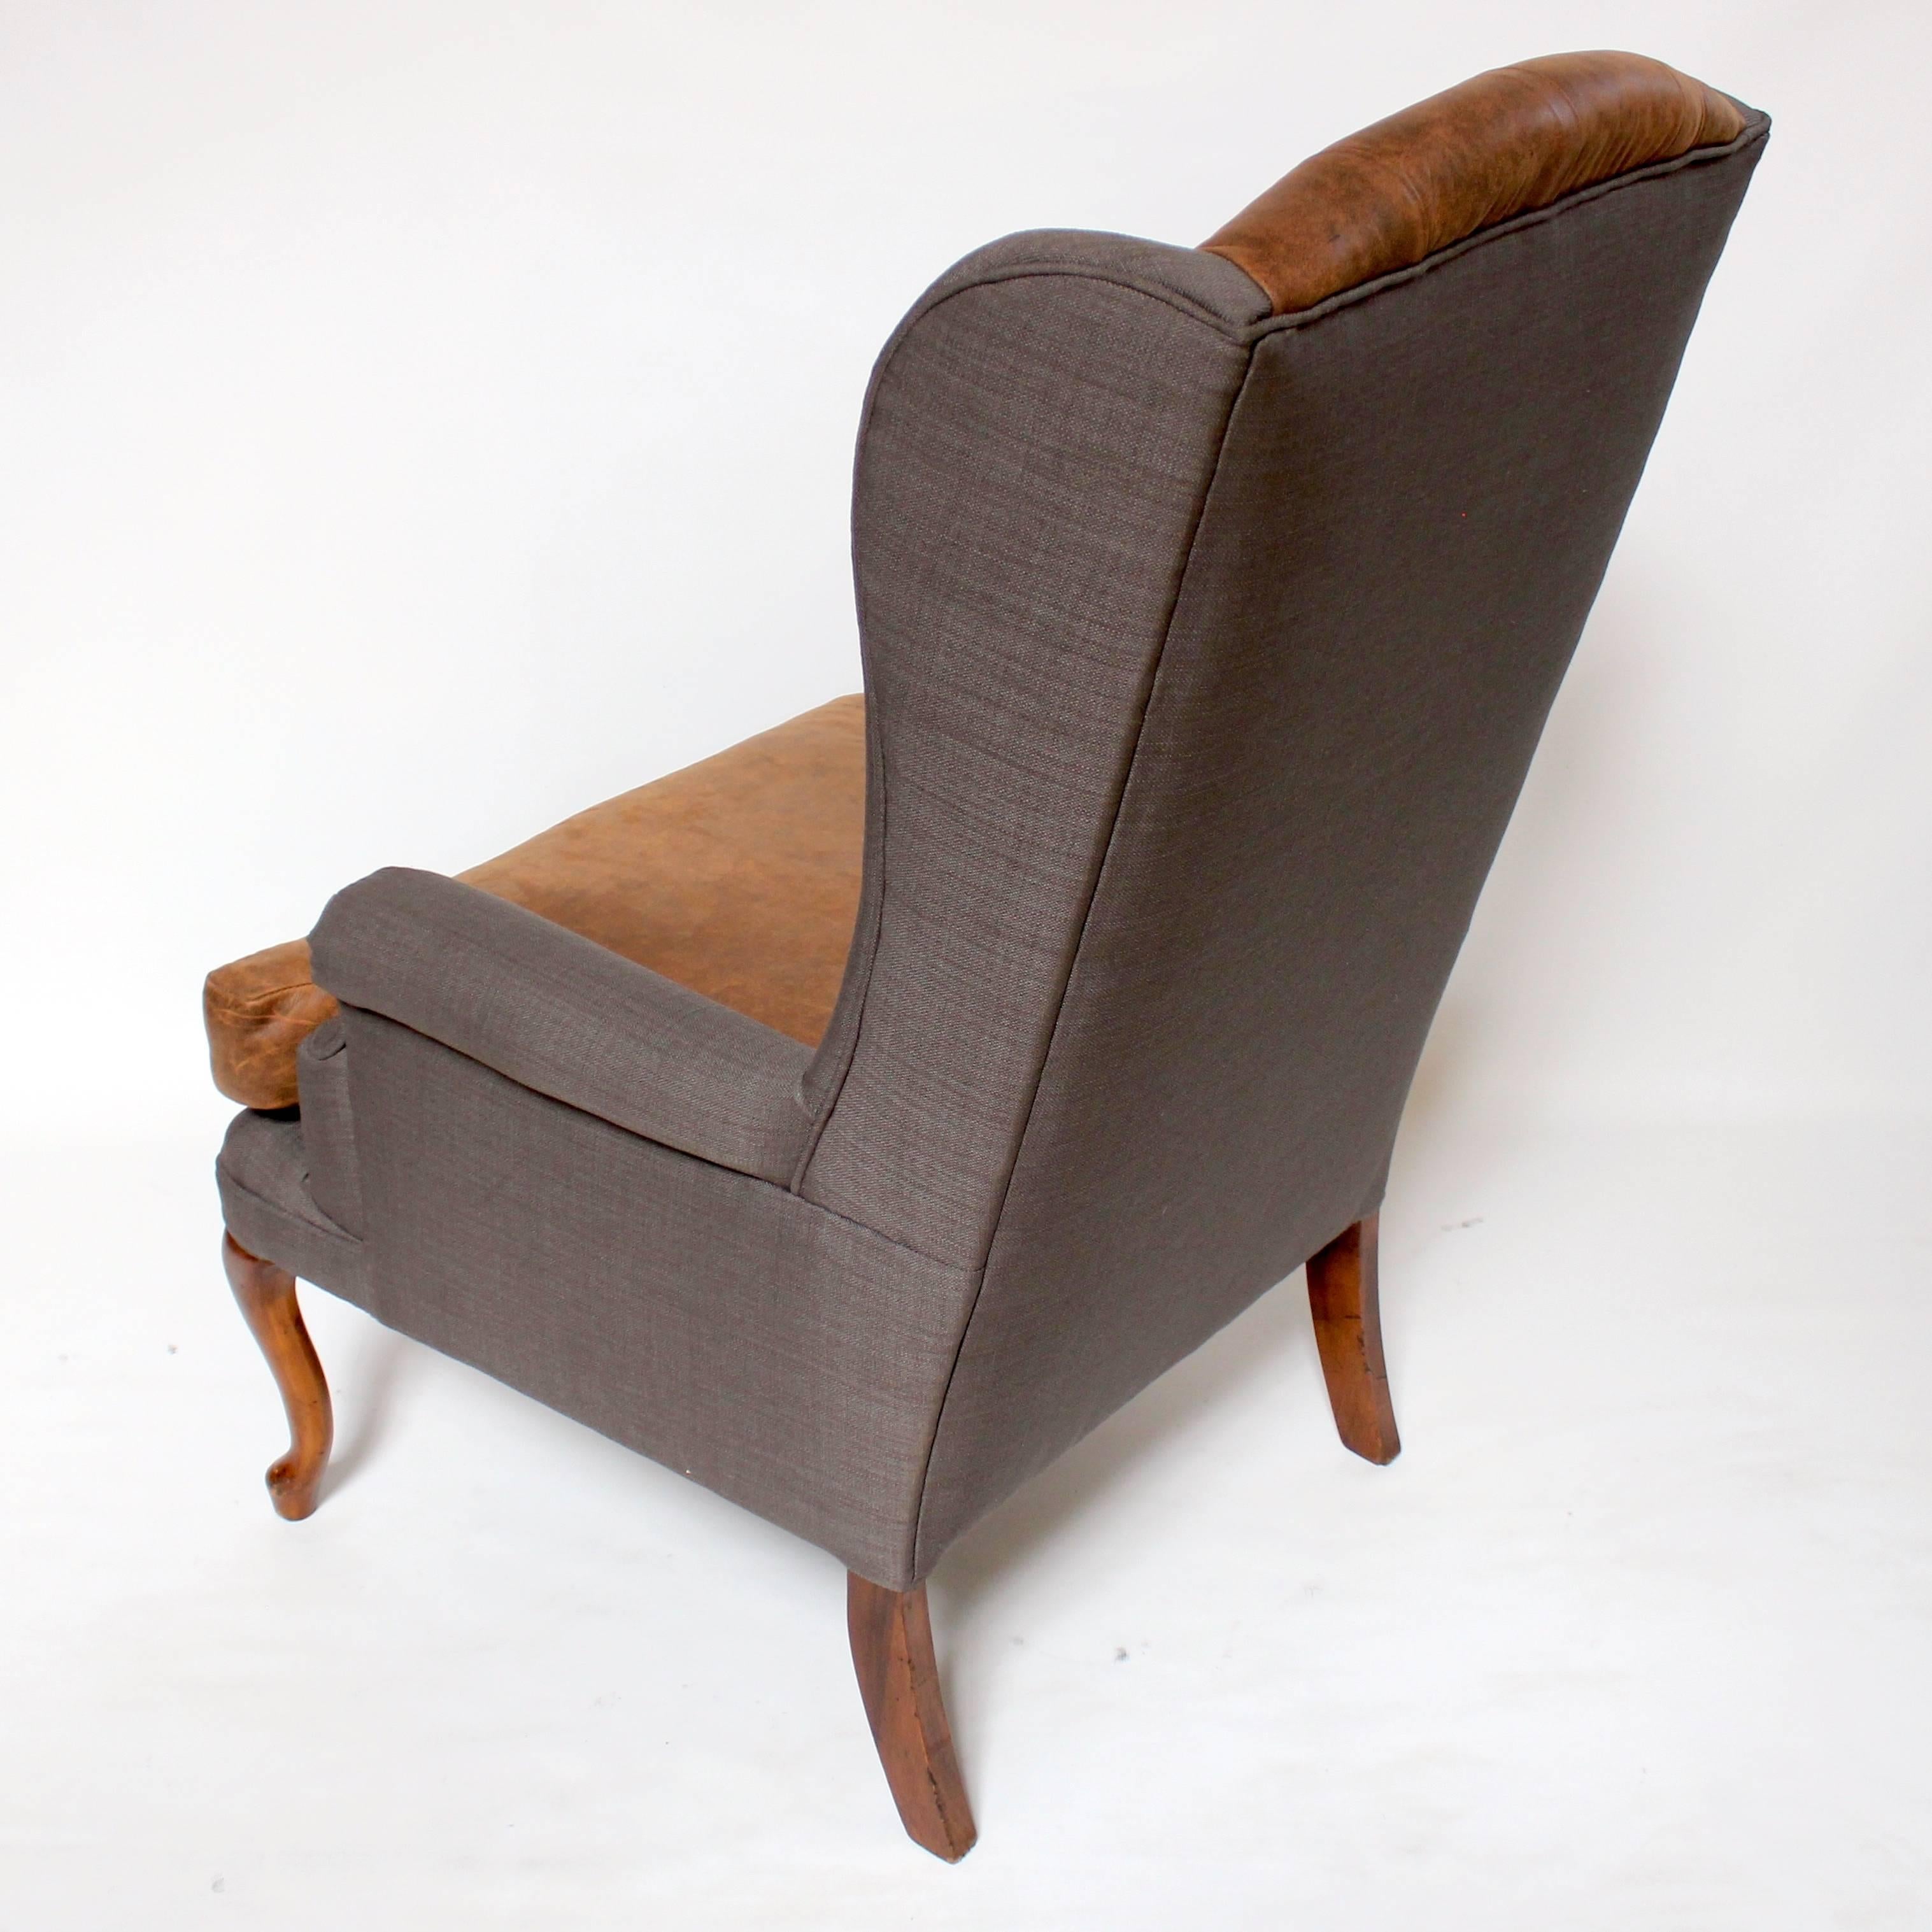 20th Century Pair of Vintage American Hardwood Wingback Chairs with Napa Leather Upholstery